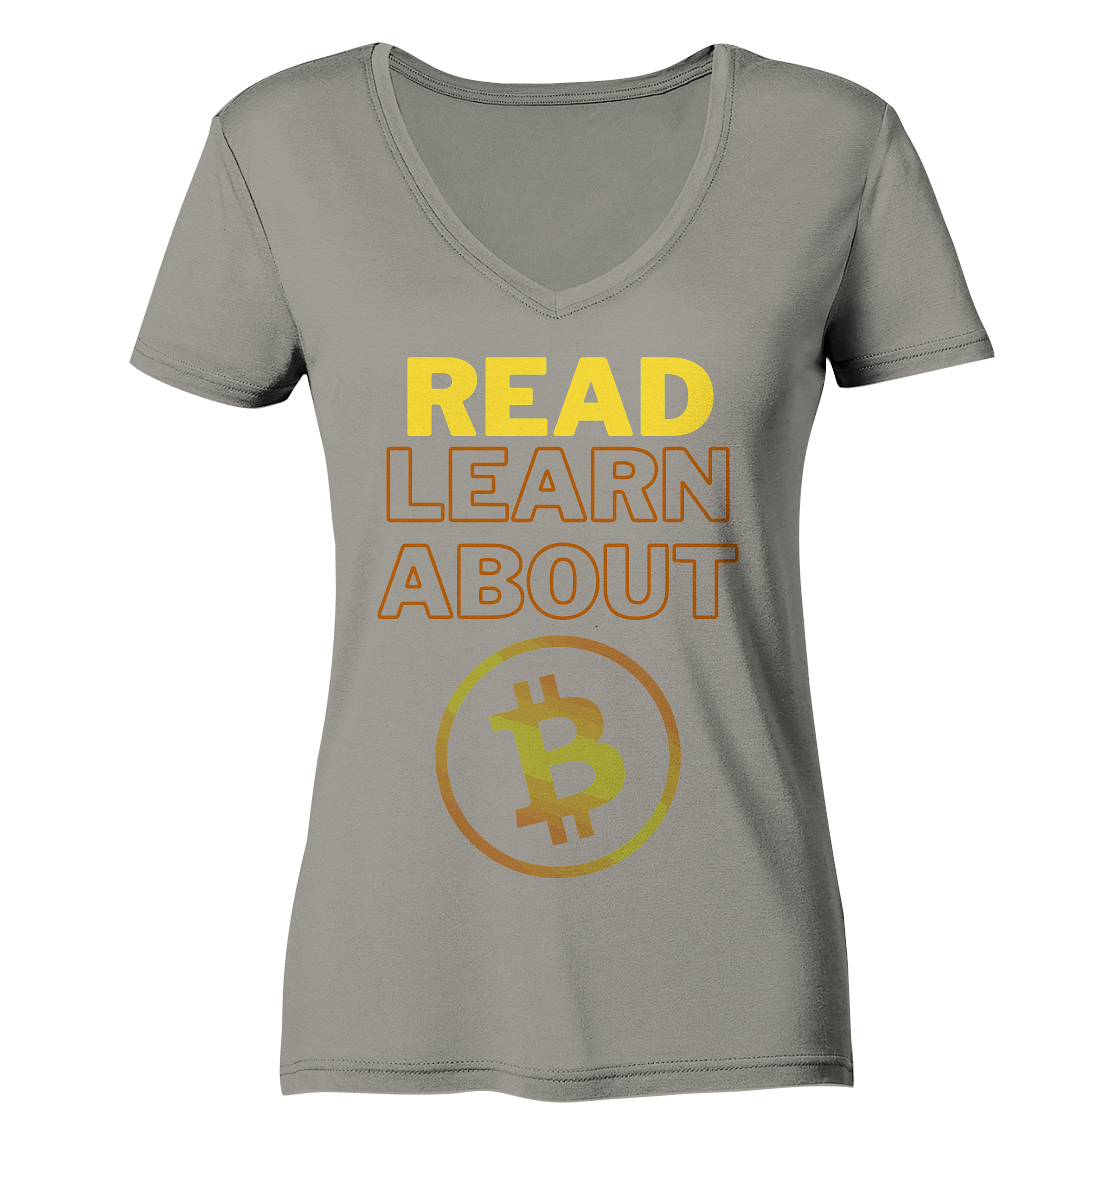 READ - LEARN ABOUT BITCOIN - Ladies Collection - Ladies V-Neck Shirt